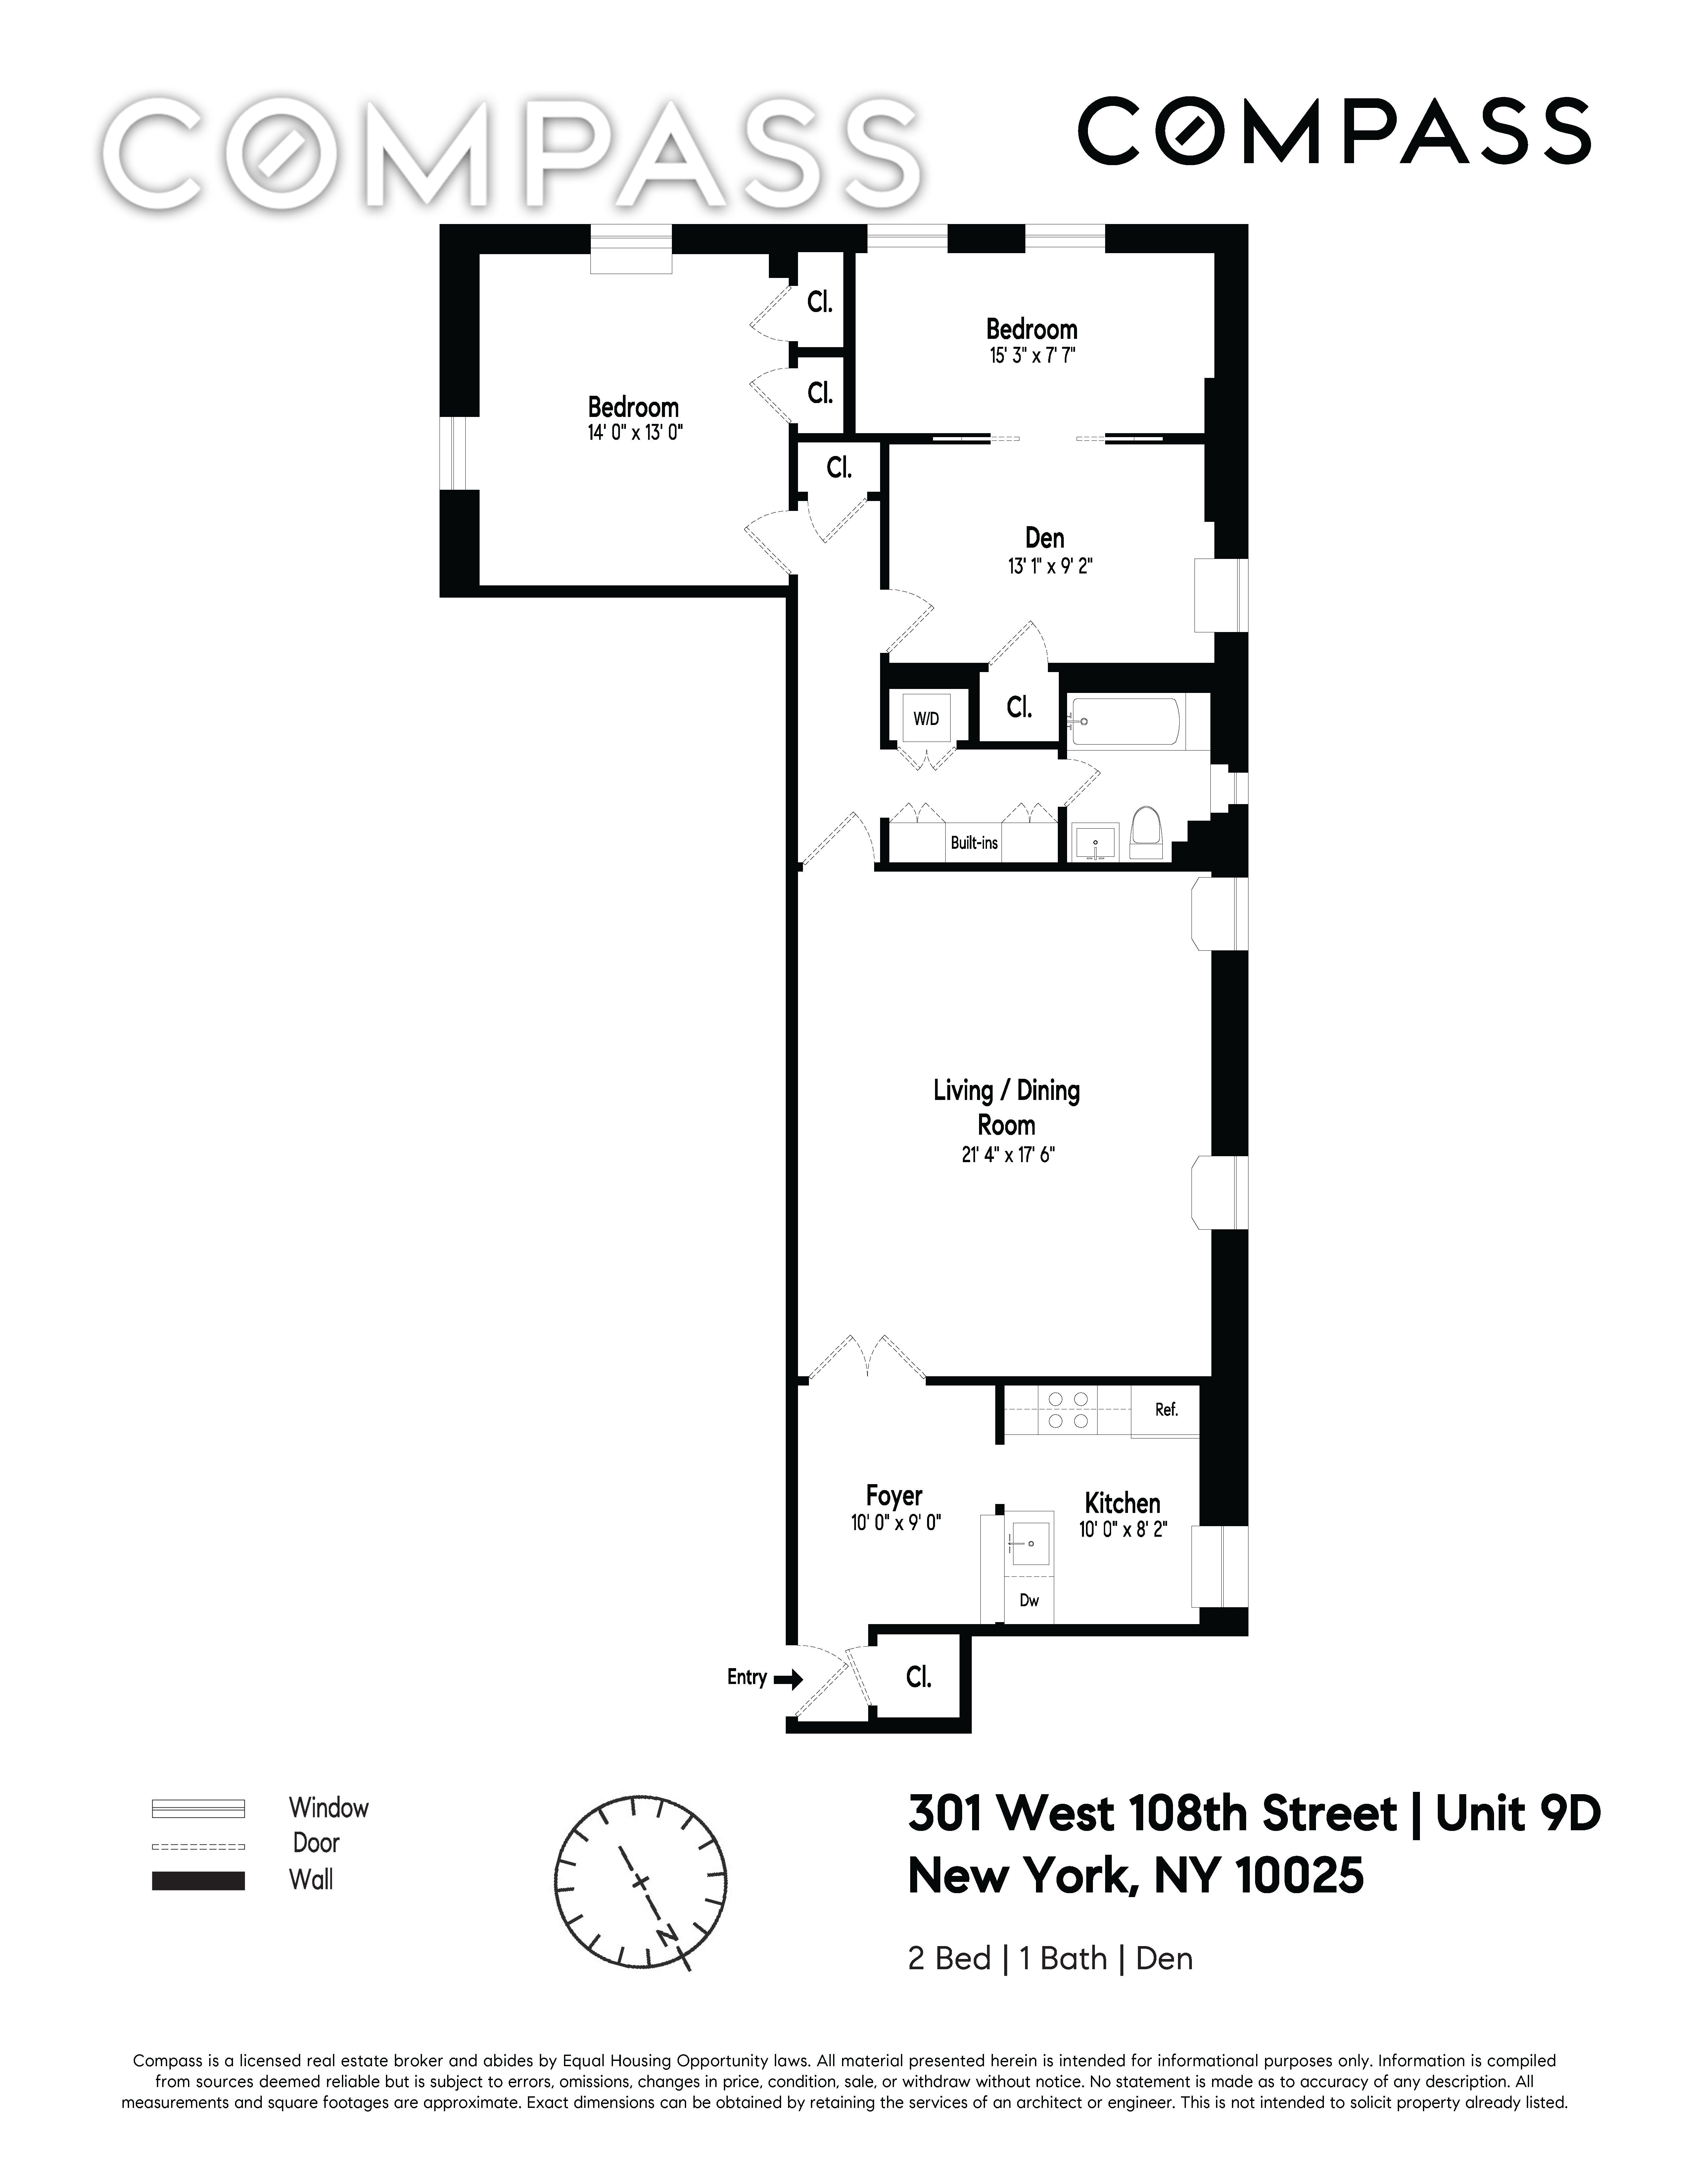 301 West 108th Street 9-D Upper West Side New York NY 10025